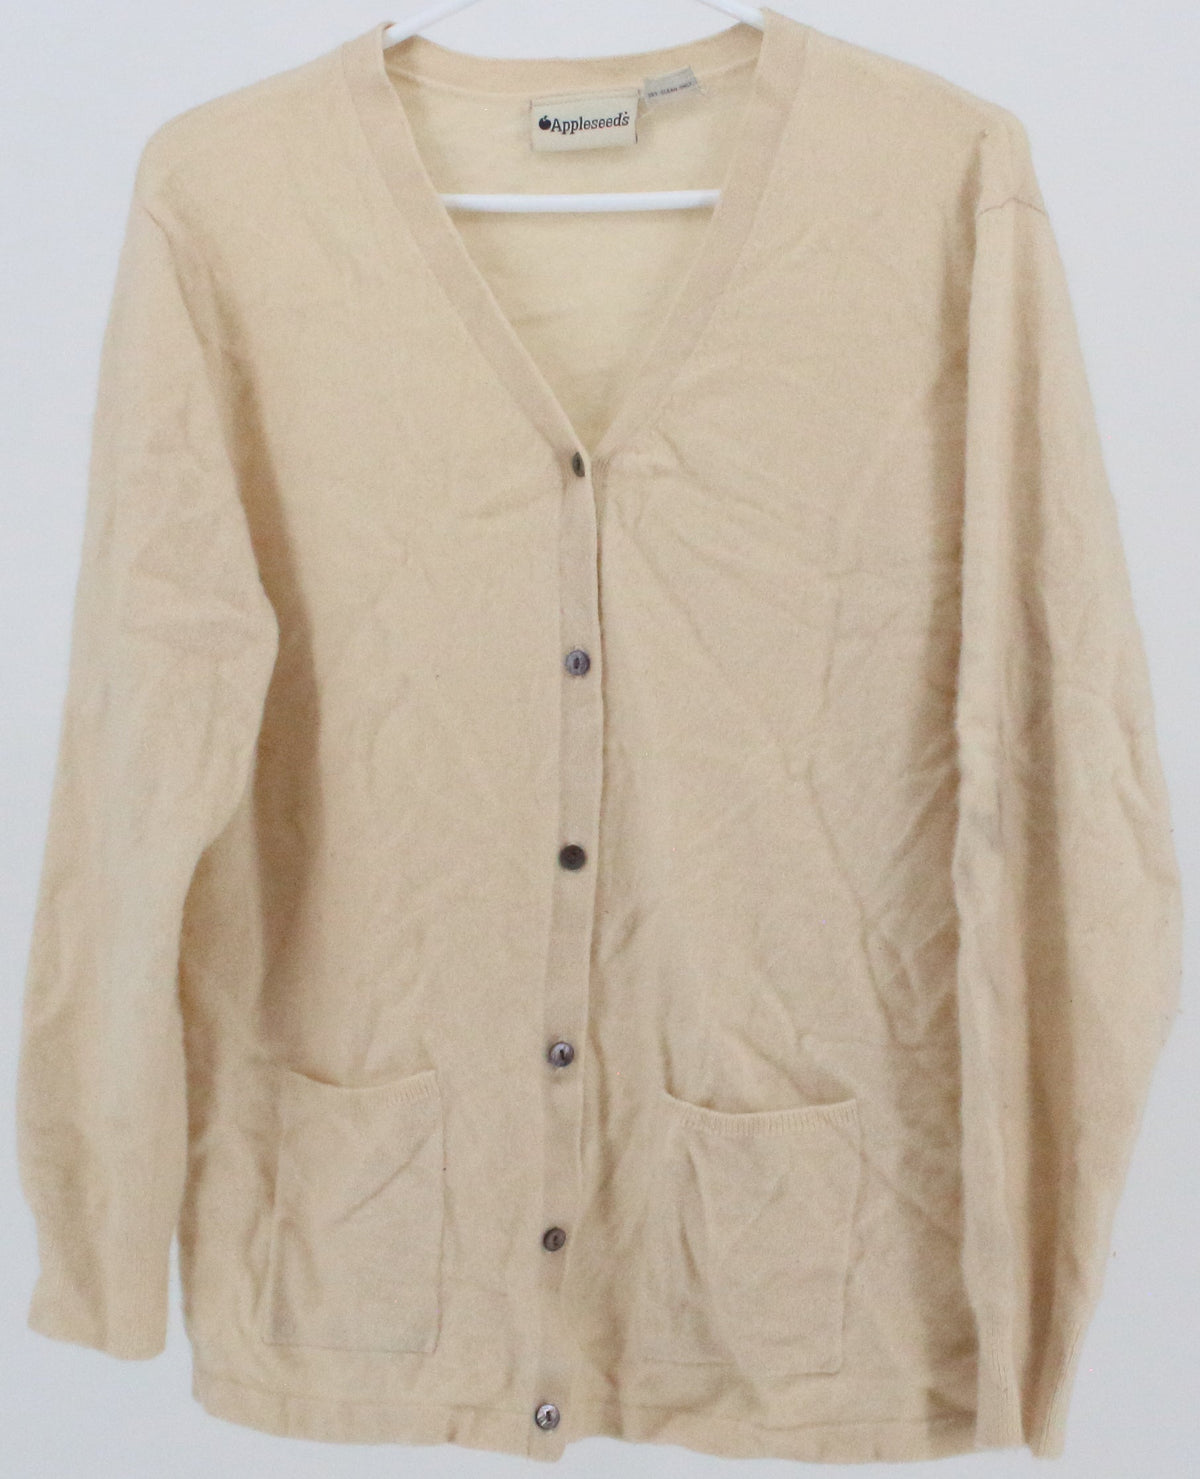 Appleseed's Off White Cashmere Cardigan Sweater